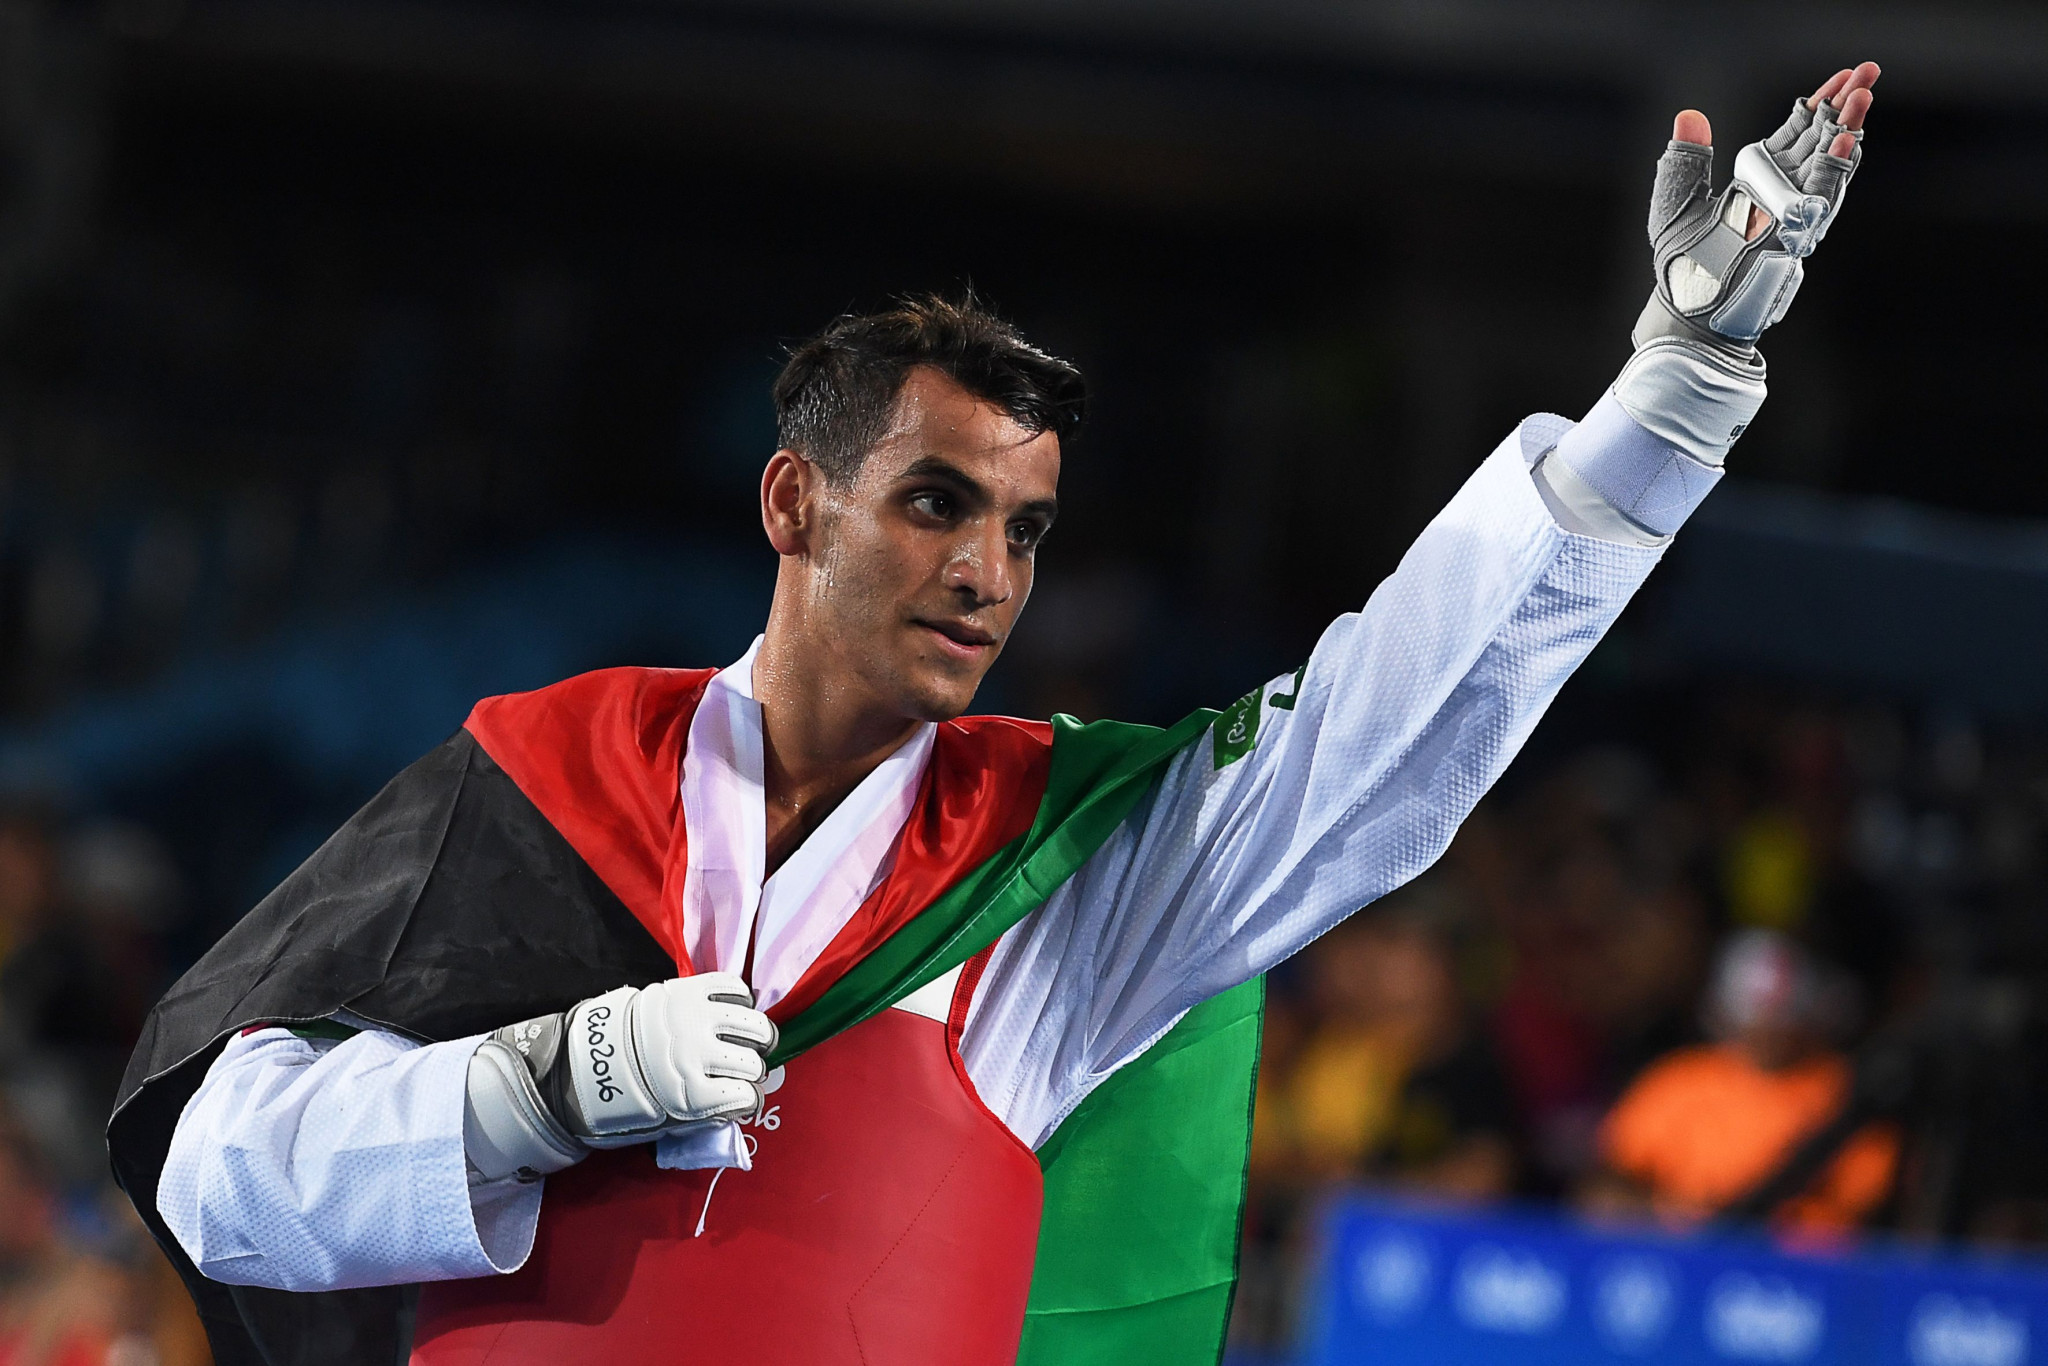 Ahmad Abughaush's gold at the Rio 2016 Olympics has inspired the Jordan Olympic Committee to push for further success at Tokyo 2020 ©Getty Images